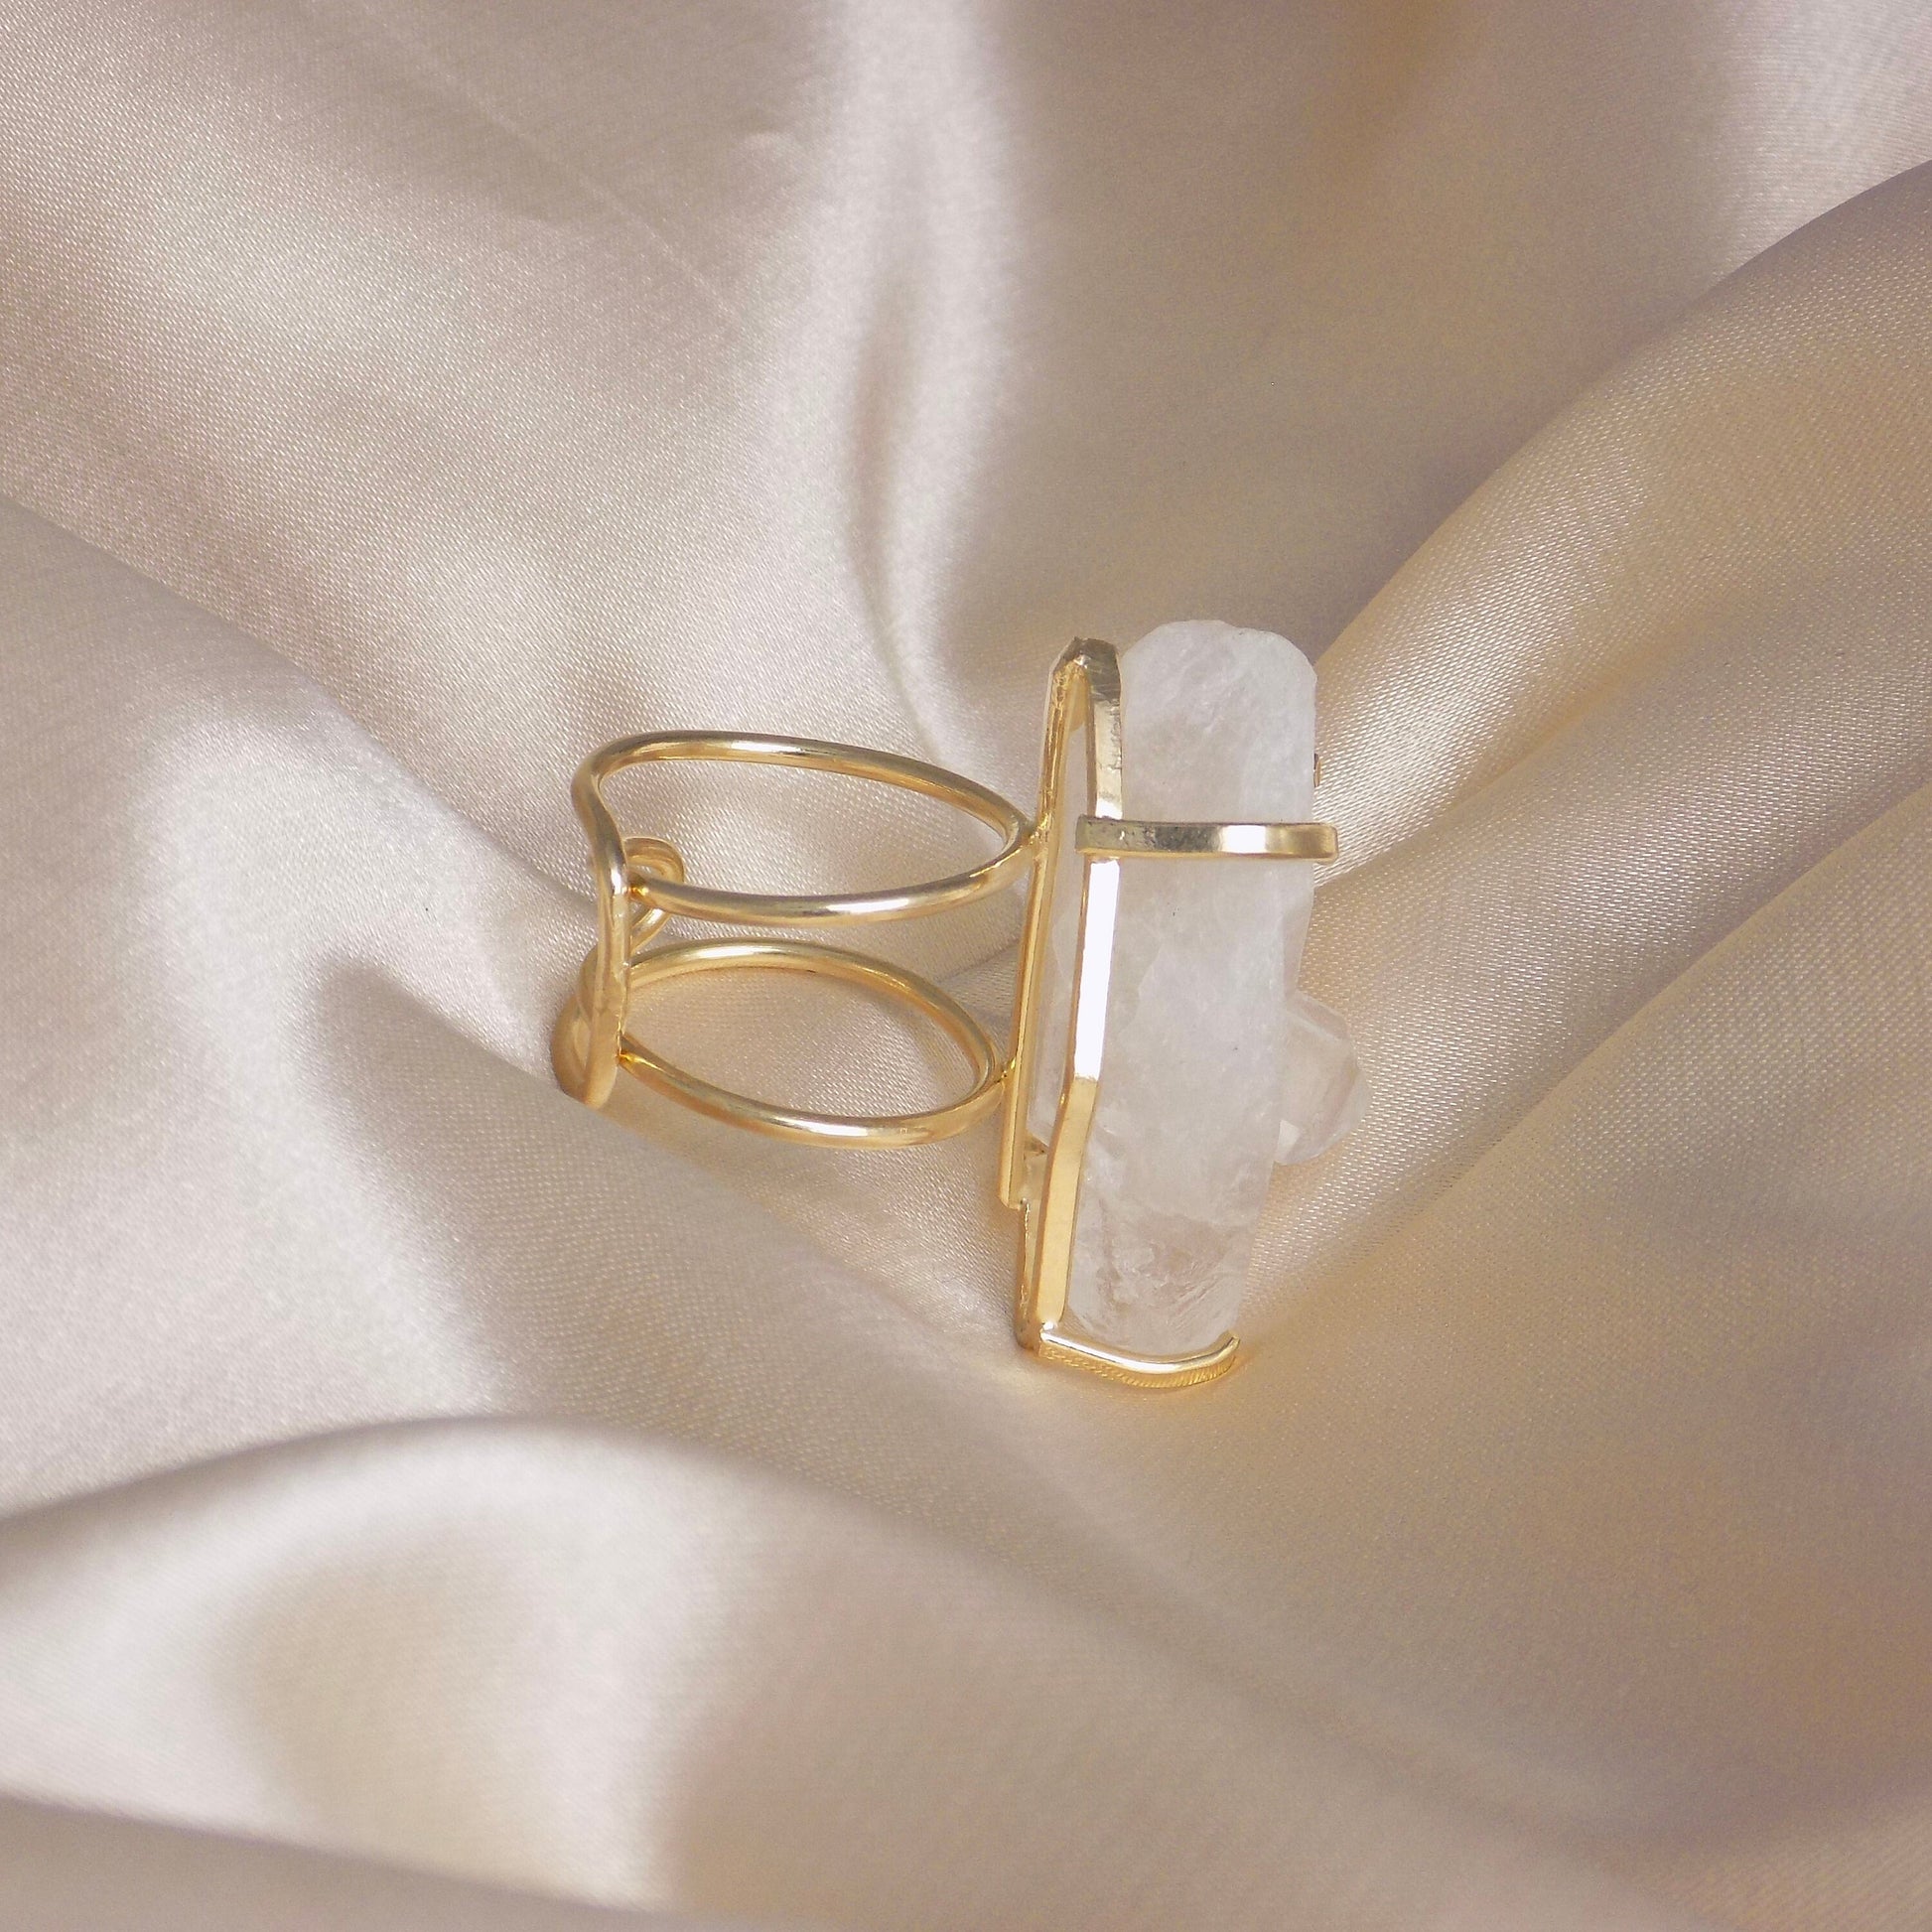 Raw Crystal Ring, Large Statement Clear Crystal Quartz Ring Gold Plated Adjustable, G15-112